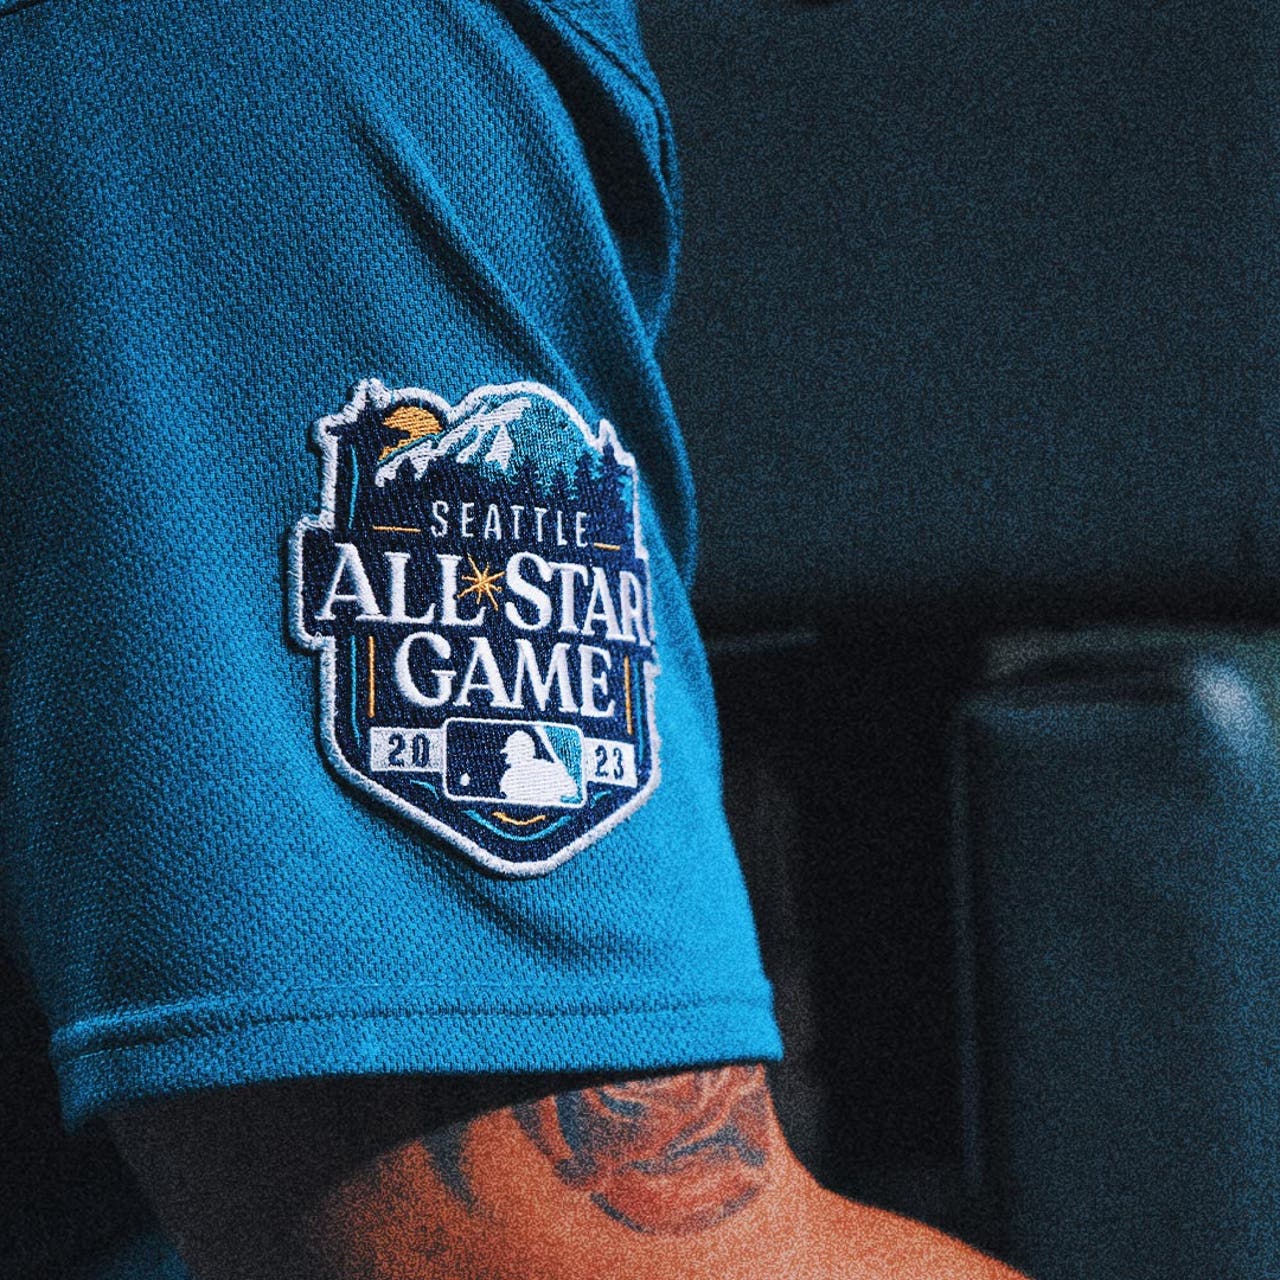 MLB Unveils All-Star Week, Holiday Uniforms, by MLB.com/blogs